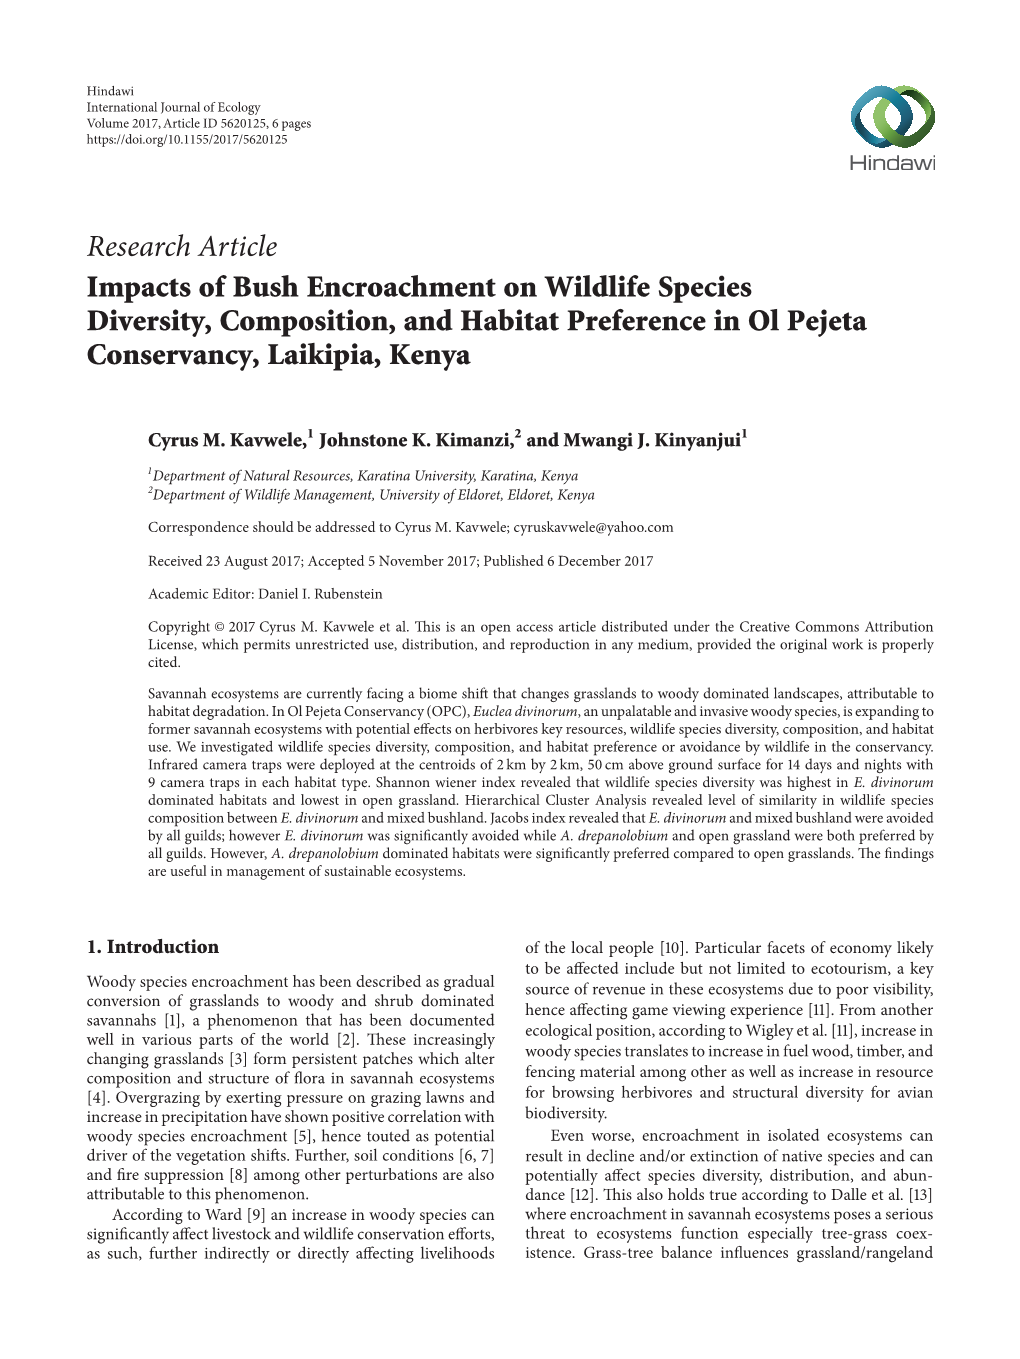 Research Article Impacts of Bush Encroachment on Wildlife Species Diversity, Composition, and Habitat Preference in Ol Pejeta Conservancy, Laikipia, Kenya